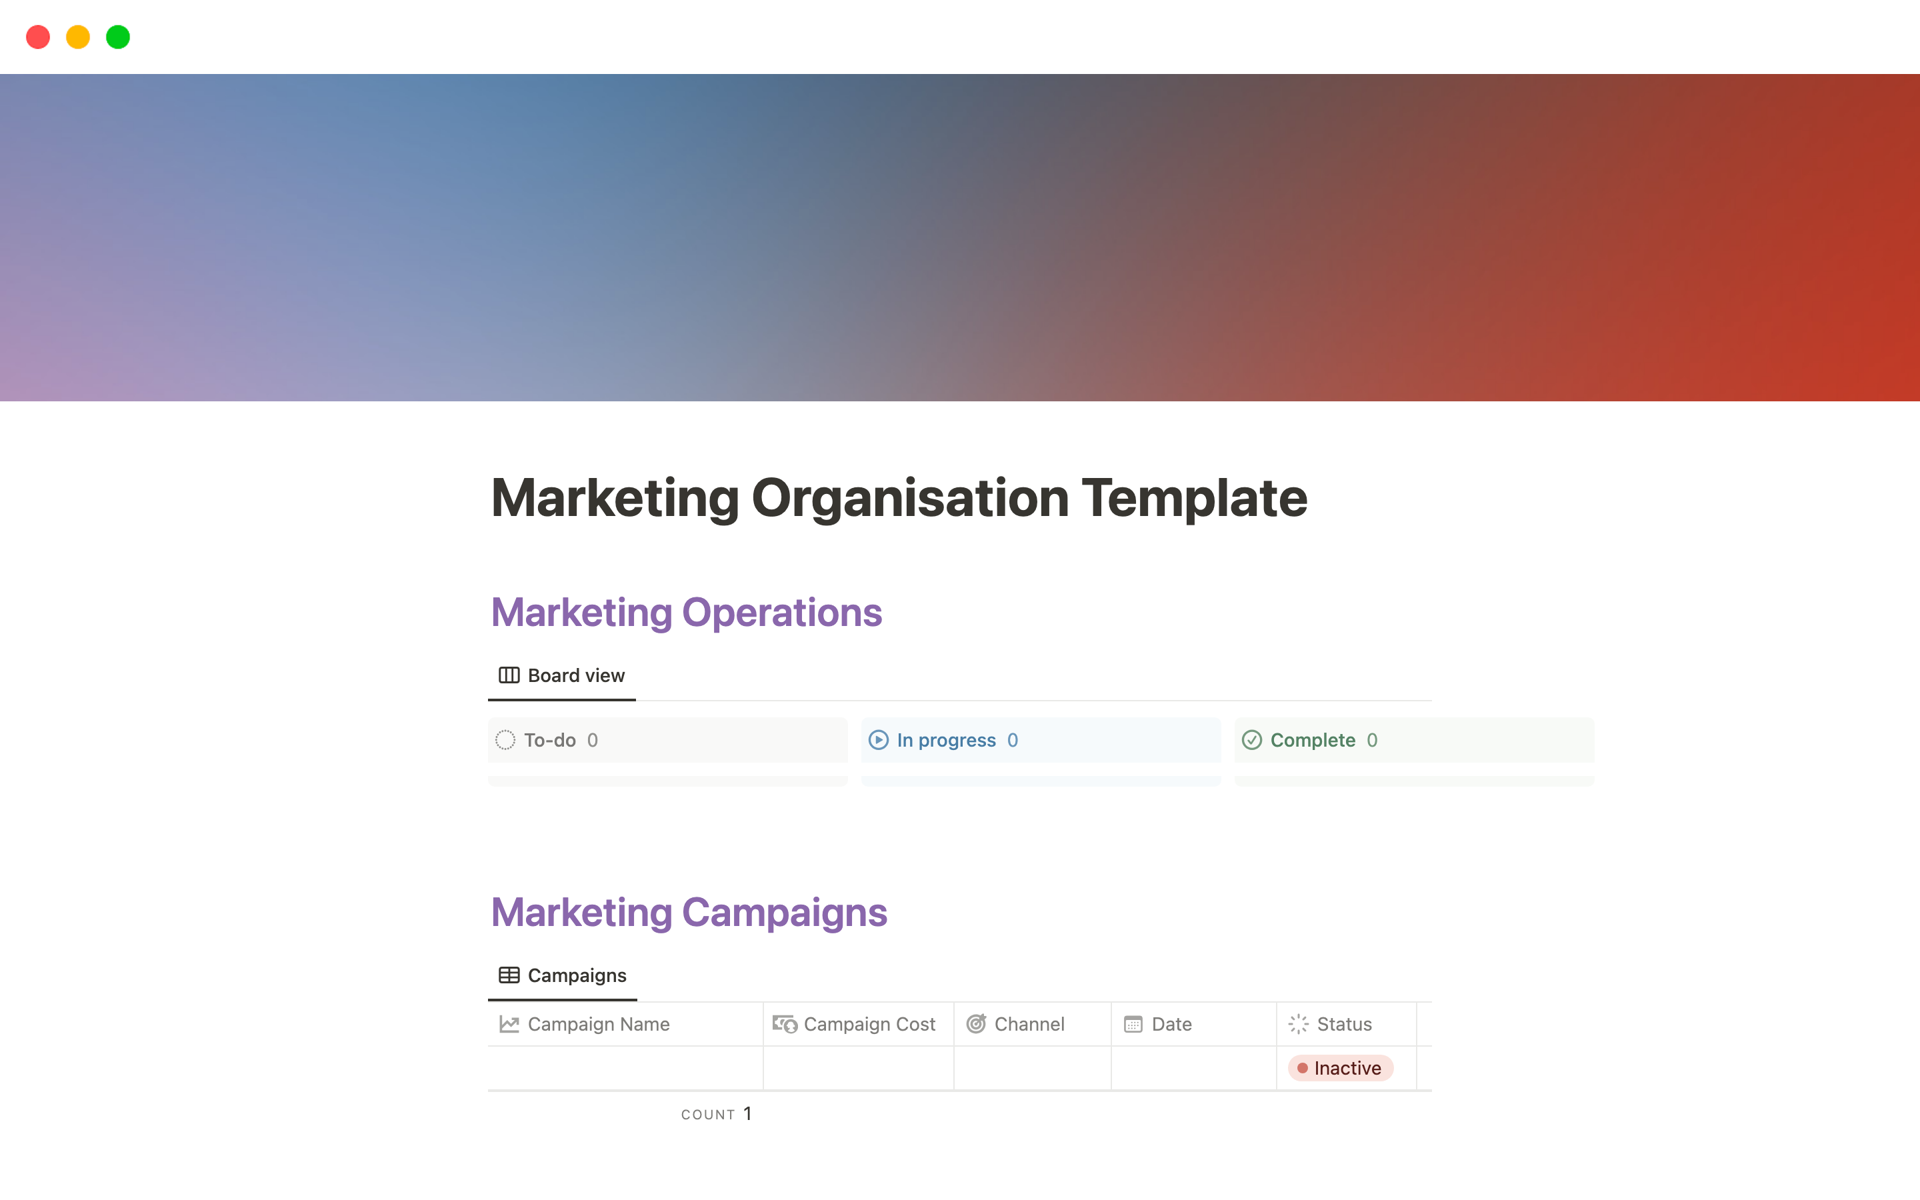 Simple Notion Page for marketers to easily organise their businesses marketing resources.